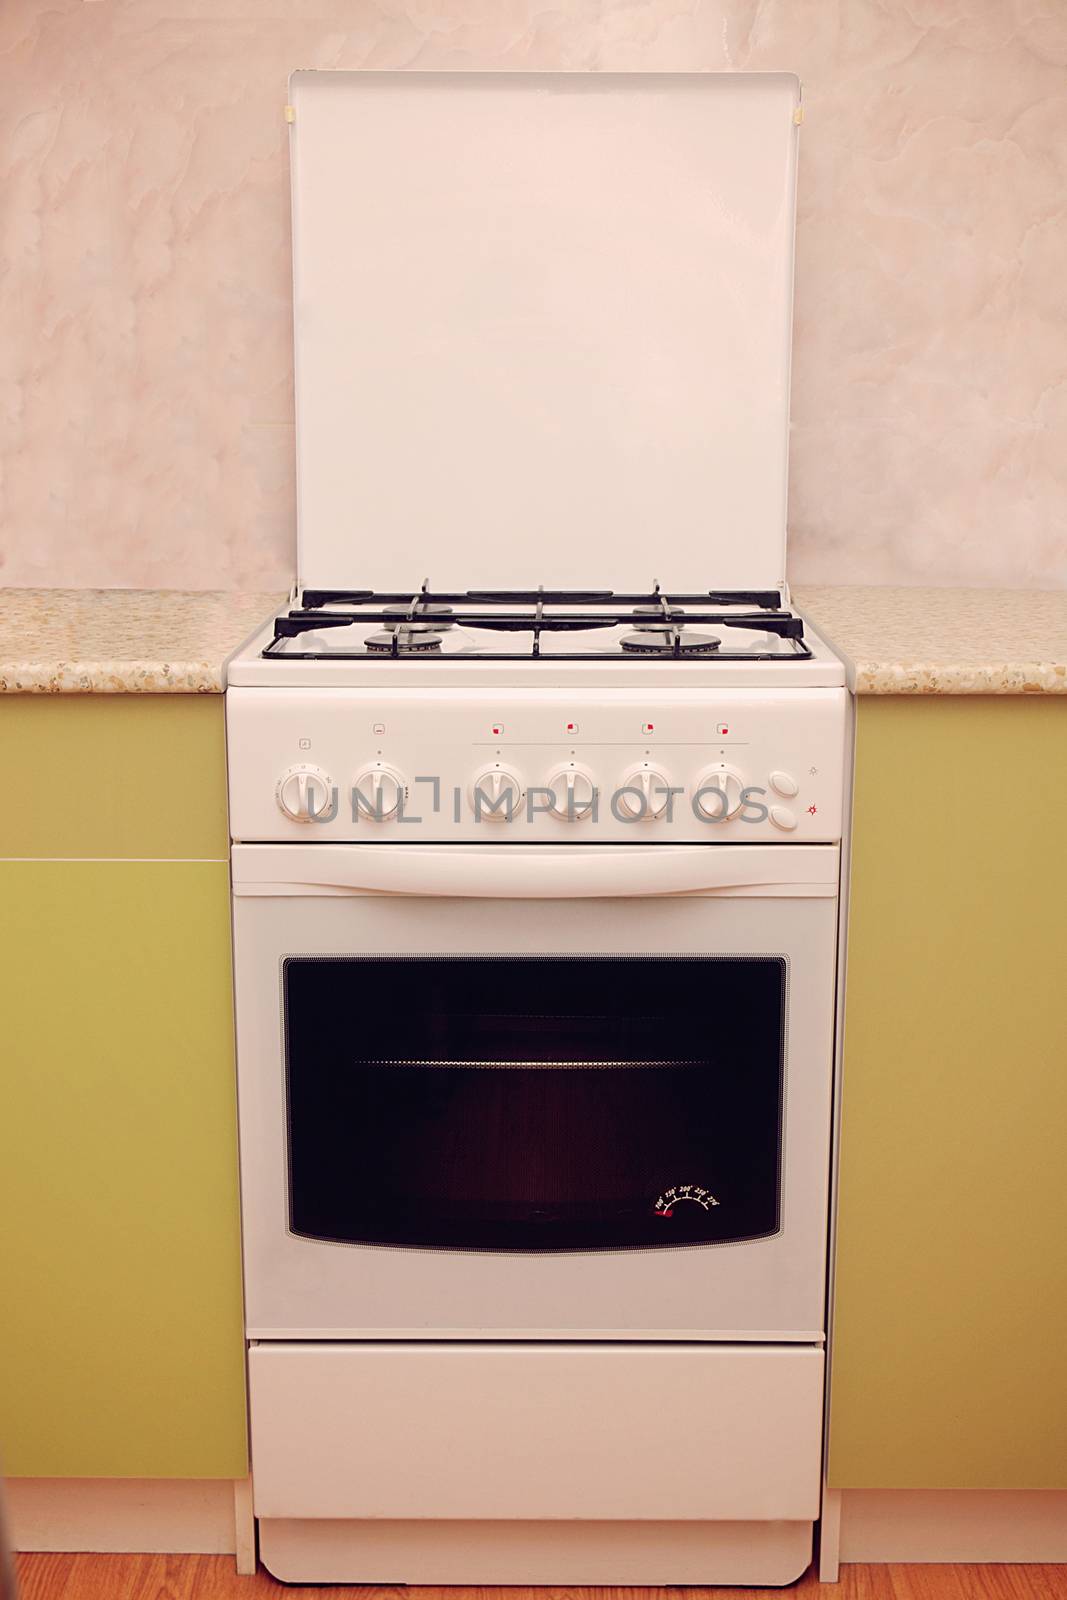 Kitchen gas cooker for cooking. by andsst